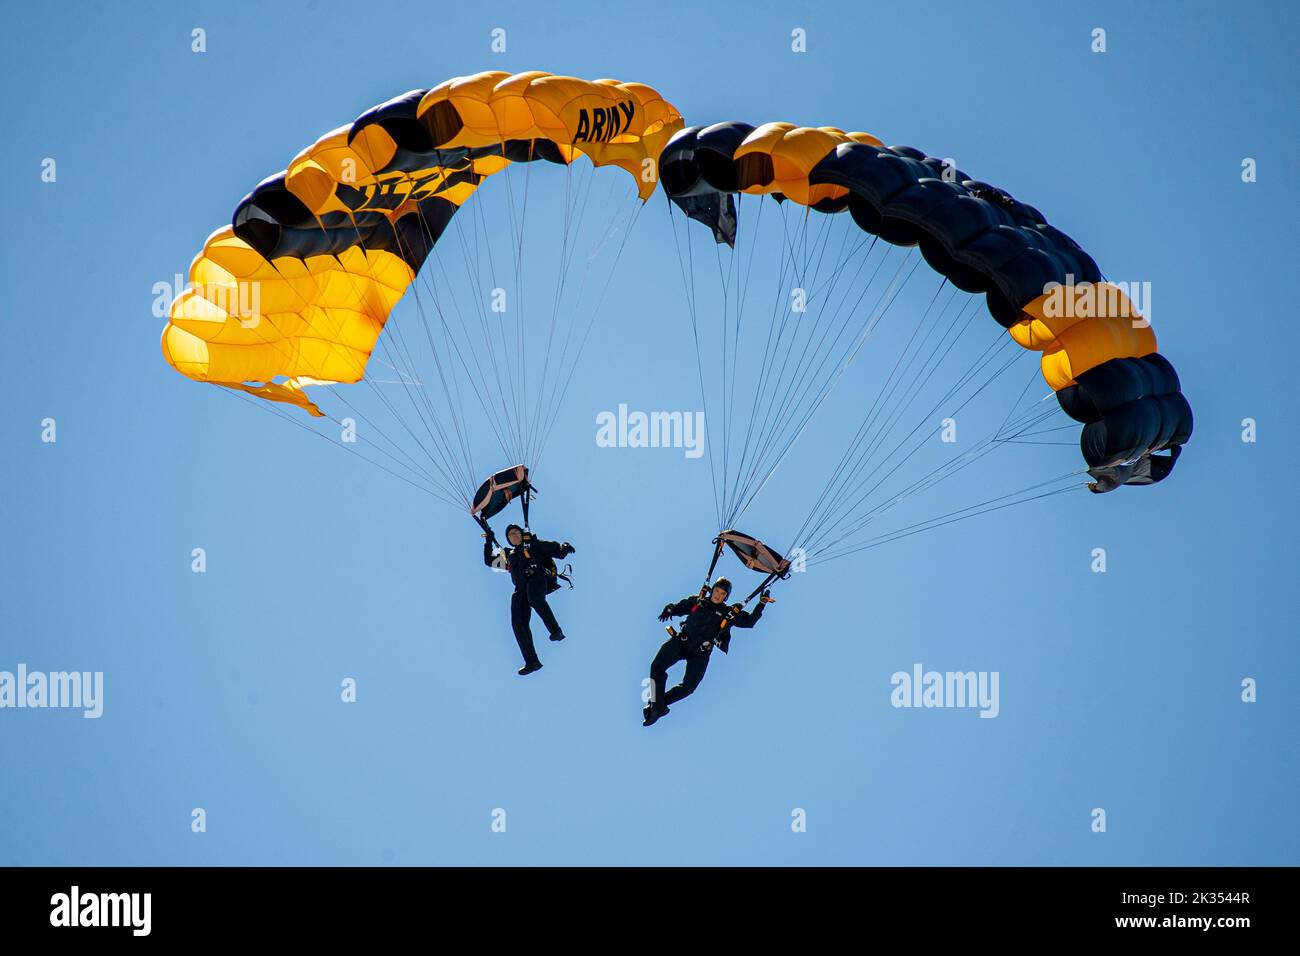 The U.S. Army Parachute Team, nicknamed the Golden Knights, and U.S. Navy Parachute Team, nicknamed the Leap Frogs, conduct an aerial demonstration at the 2022 Marine Corps Air Station Miramar Air Show at MCAS Miramar, California, Sept. 23, 2022. The theme for the 2022 MCAS Miramar Air Show, “Marines Fight, Evolve and Win,” reflects the Marine Corps’ ongoing modernization efforts to prepare for future conflicts. (U.S. Marine Corps photo by Lance Cpl. Zachary Larsen) Stock Photo